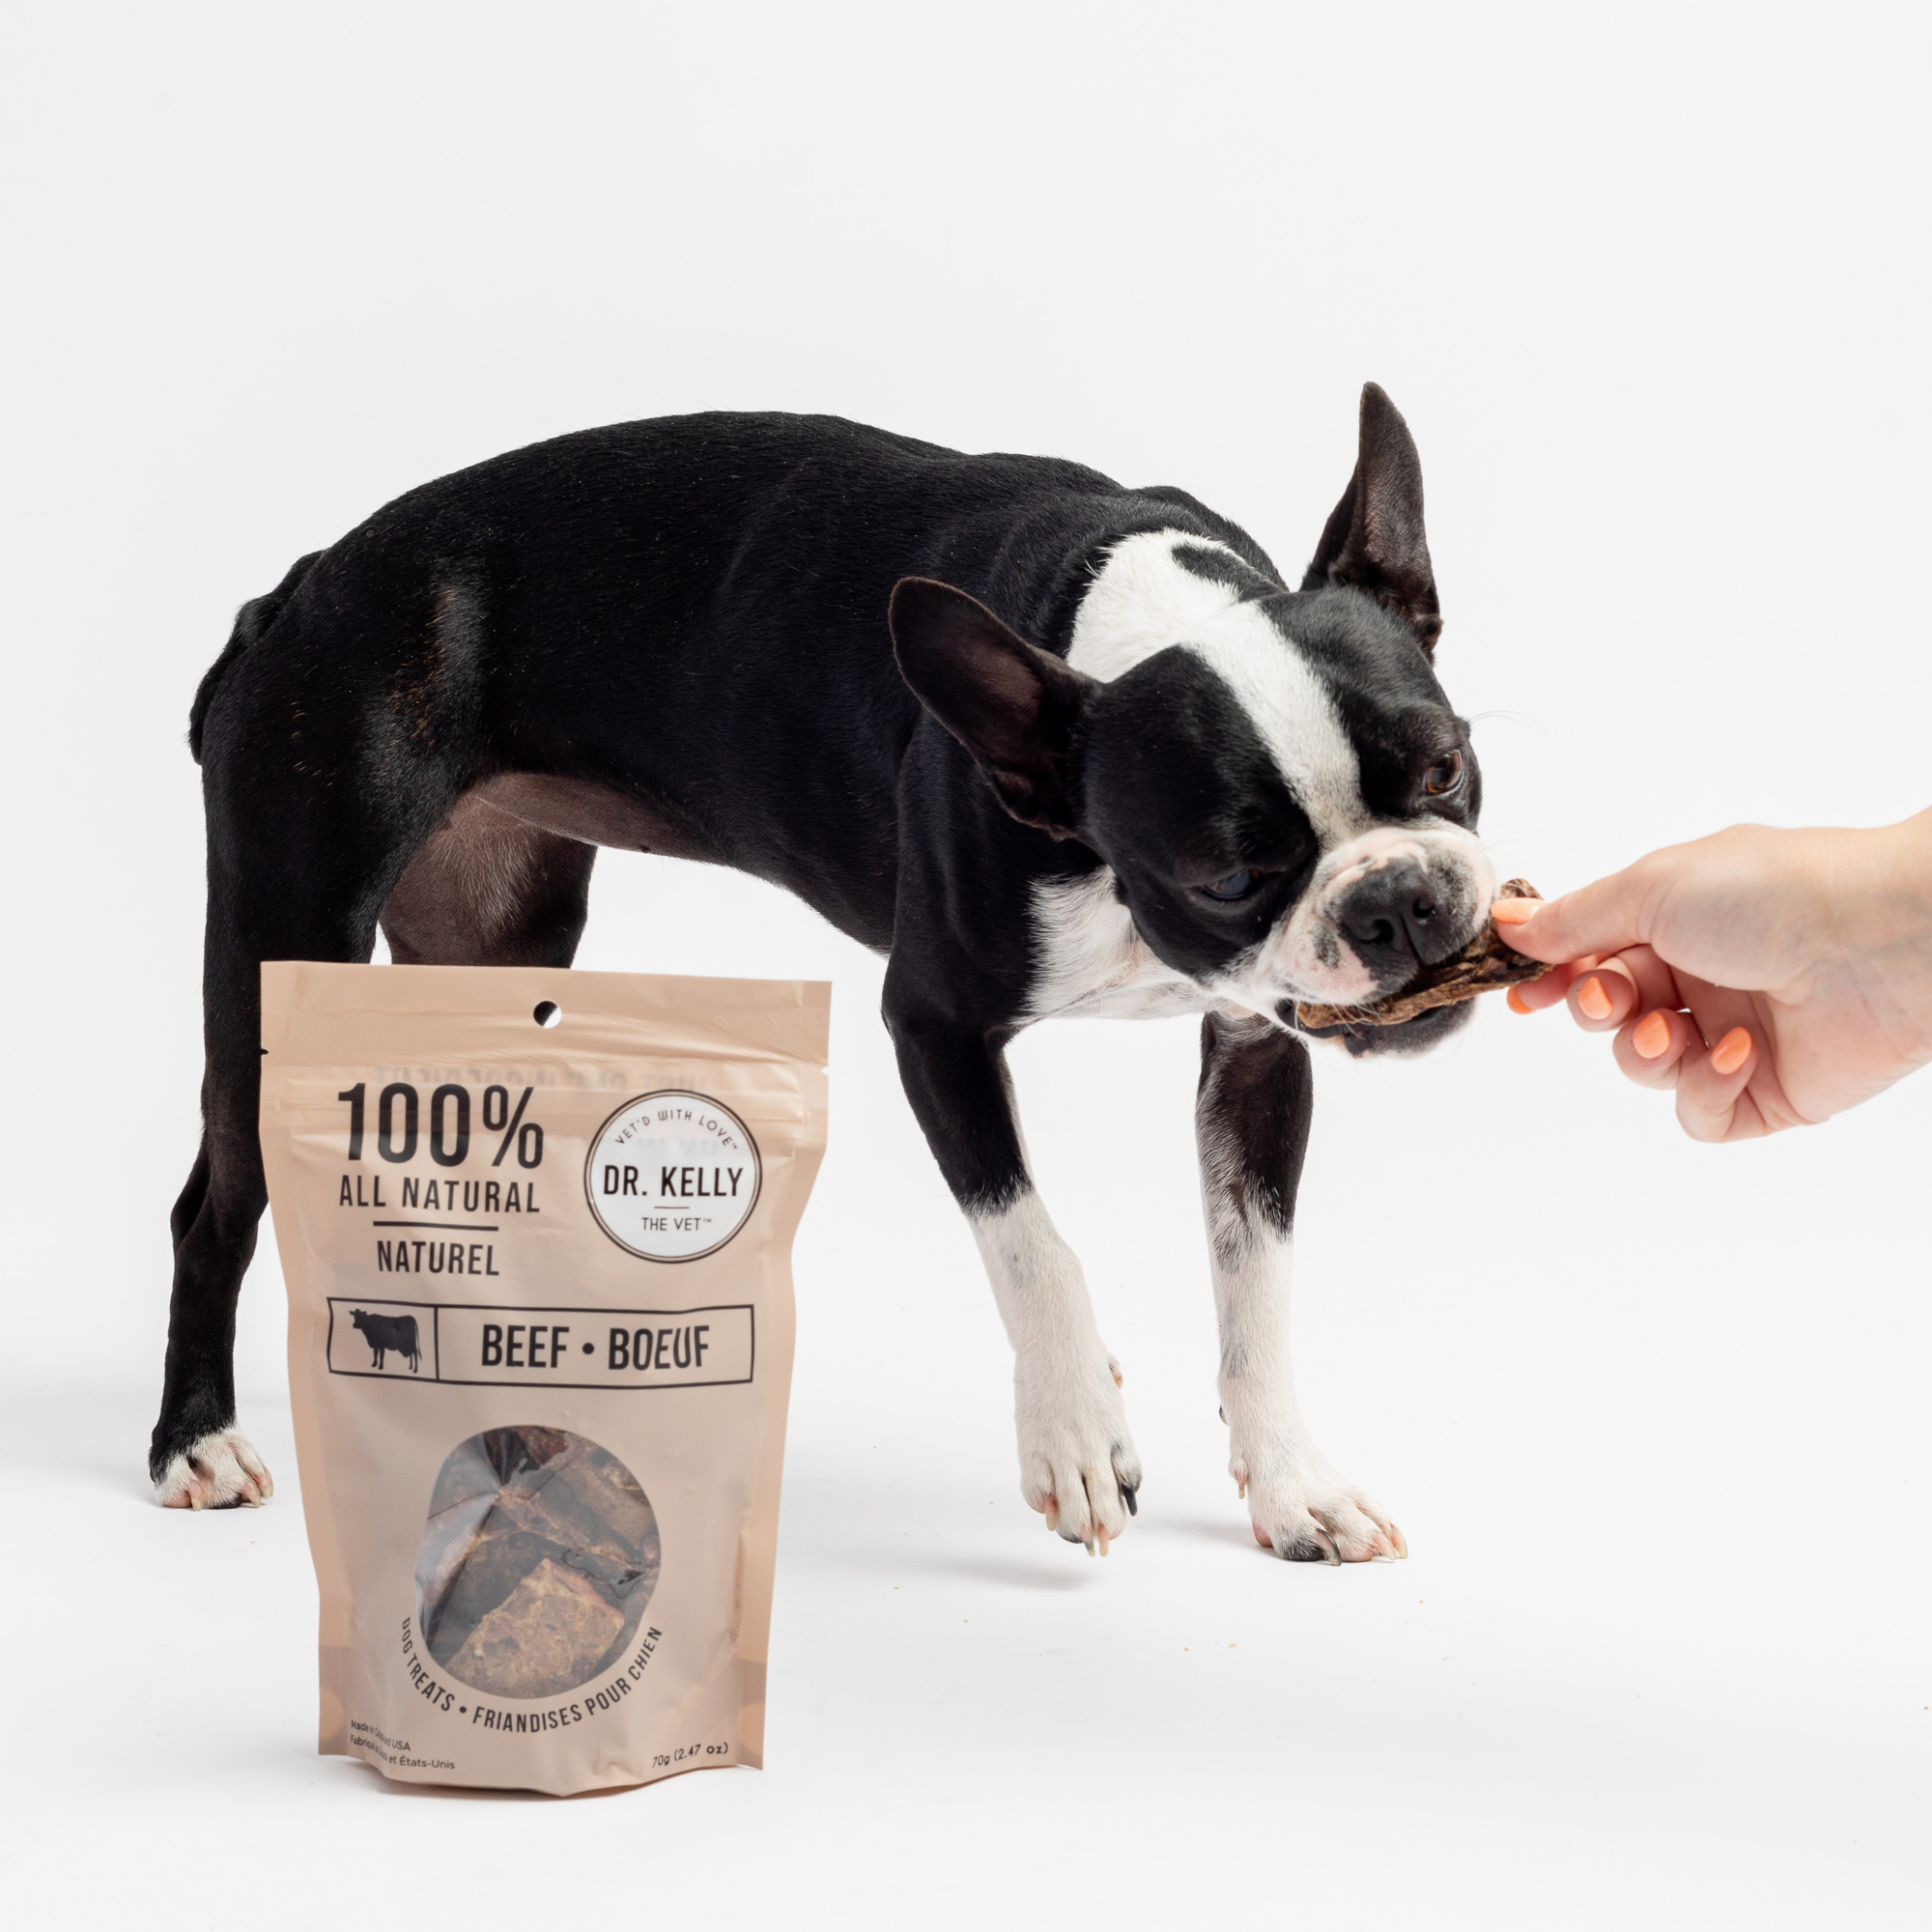 Premium Beef Dog Treats - Made with care by Dr. Kelly The Vet for your canine companion.